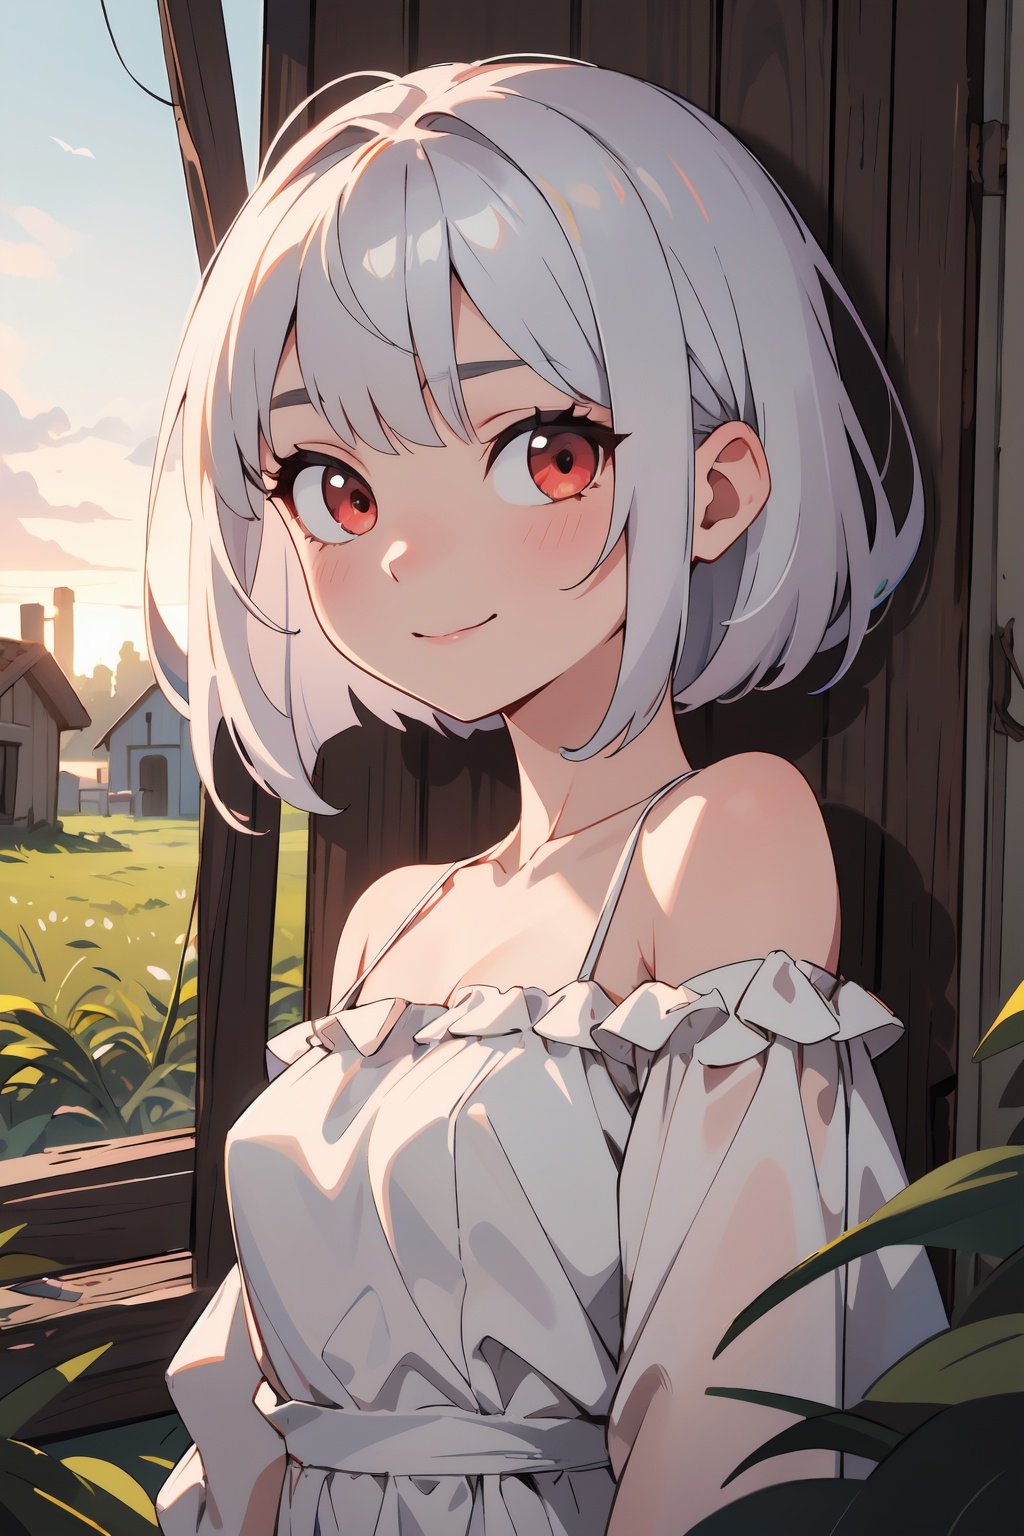 absurdres, highres, ultimate detailed, Portrait, looking at viewer, BREAK(evening1.4), sunset, (1girl:1.4), beautiful girl, Little smile, upright immovable, (white Off Shoulder sundress:1.2), (silver hair:1.2), (red eyes), medium bob hair, BREAKoutdoor, wrecked timber house, wild vegetation, echoes of past, (arresting melancholy), ultra detailed, exceptional quality, compelling piece, depth of field